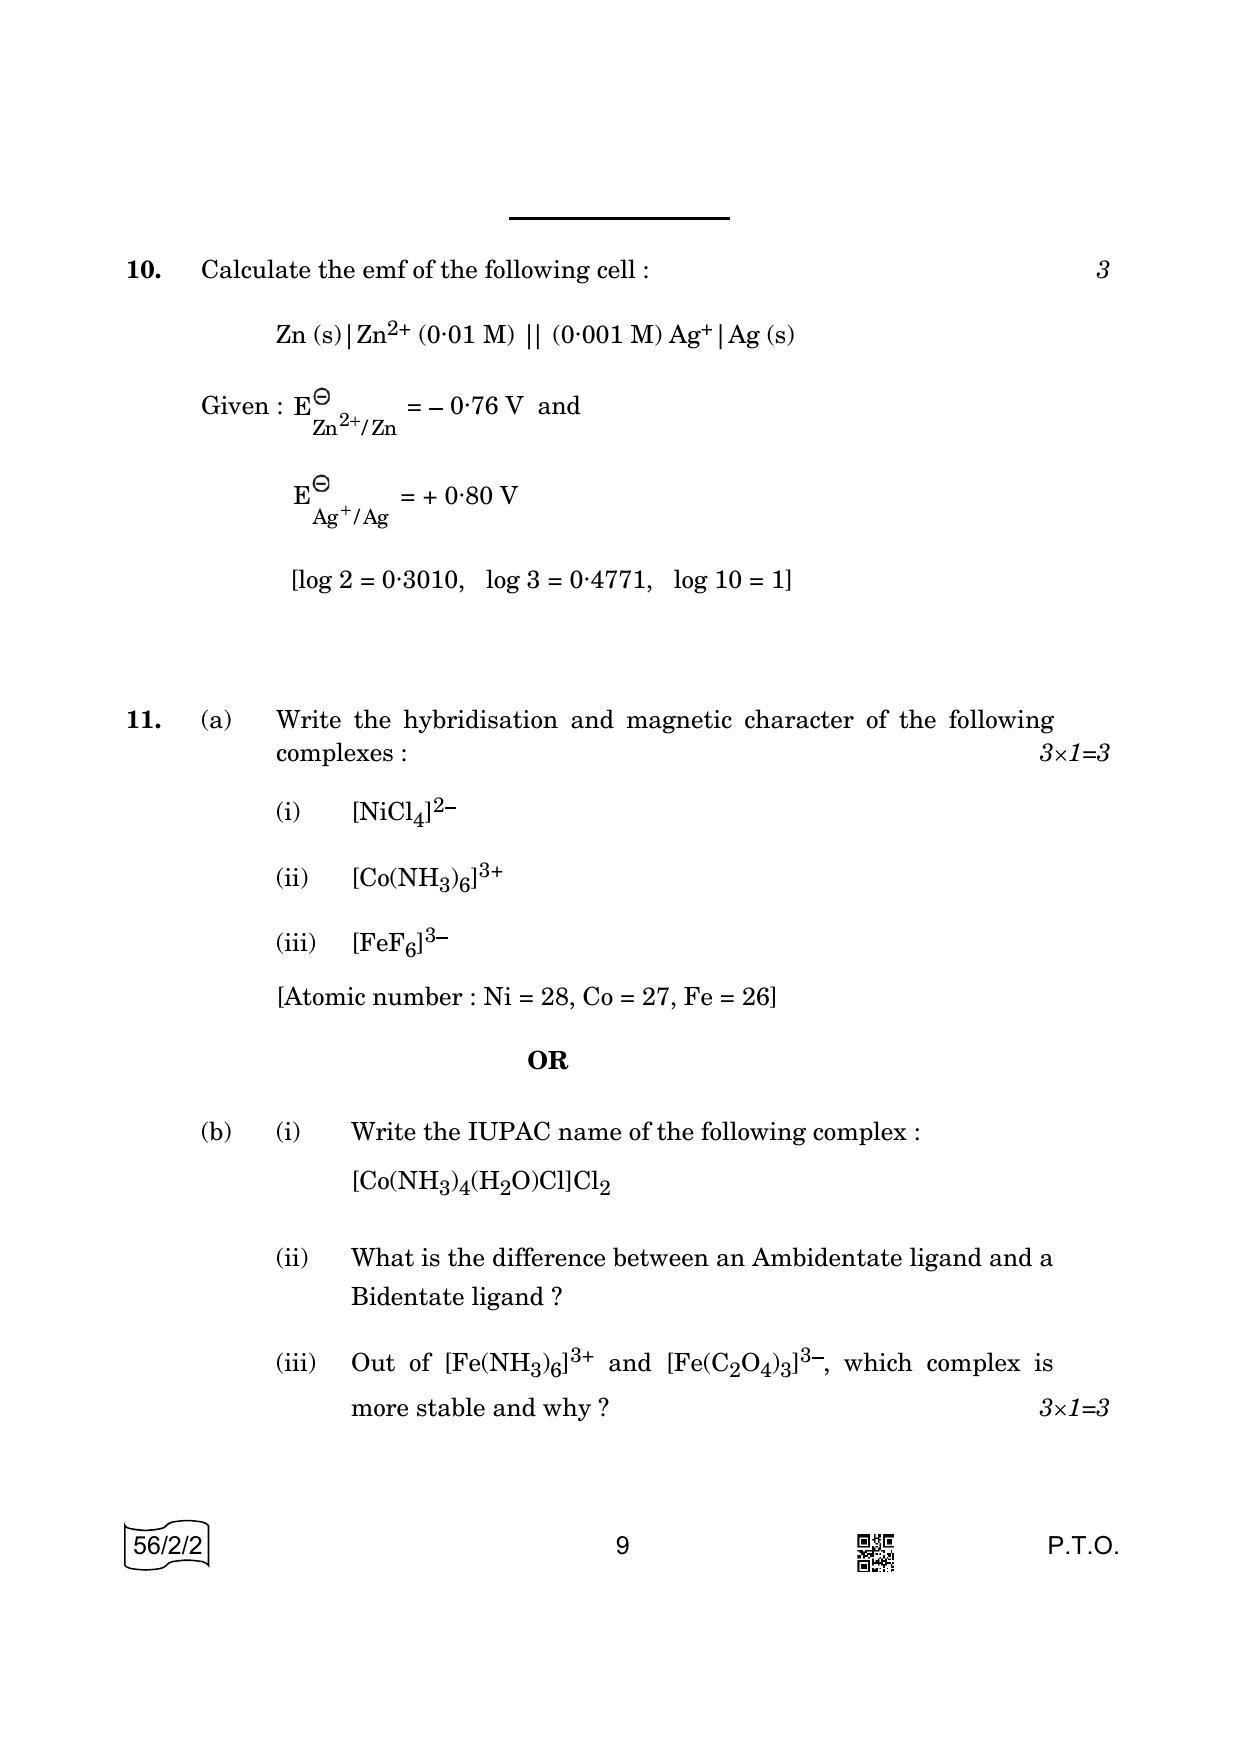 CBSE Class 12 56-2-2 Chemistry 2022 Question Paper - Page 9